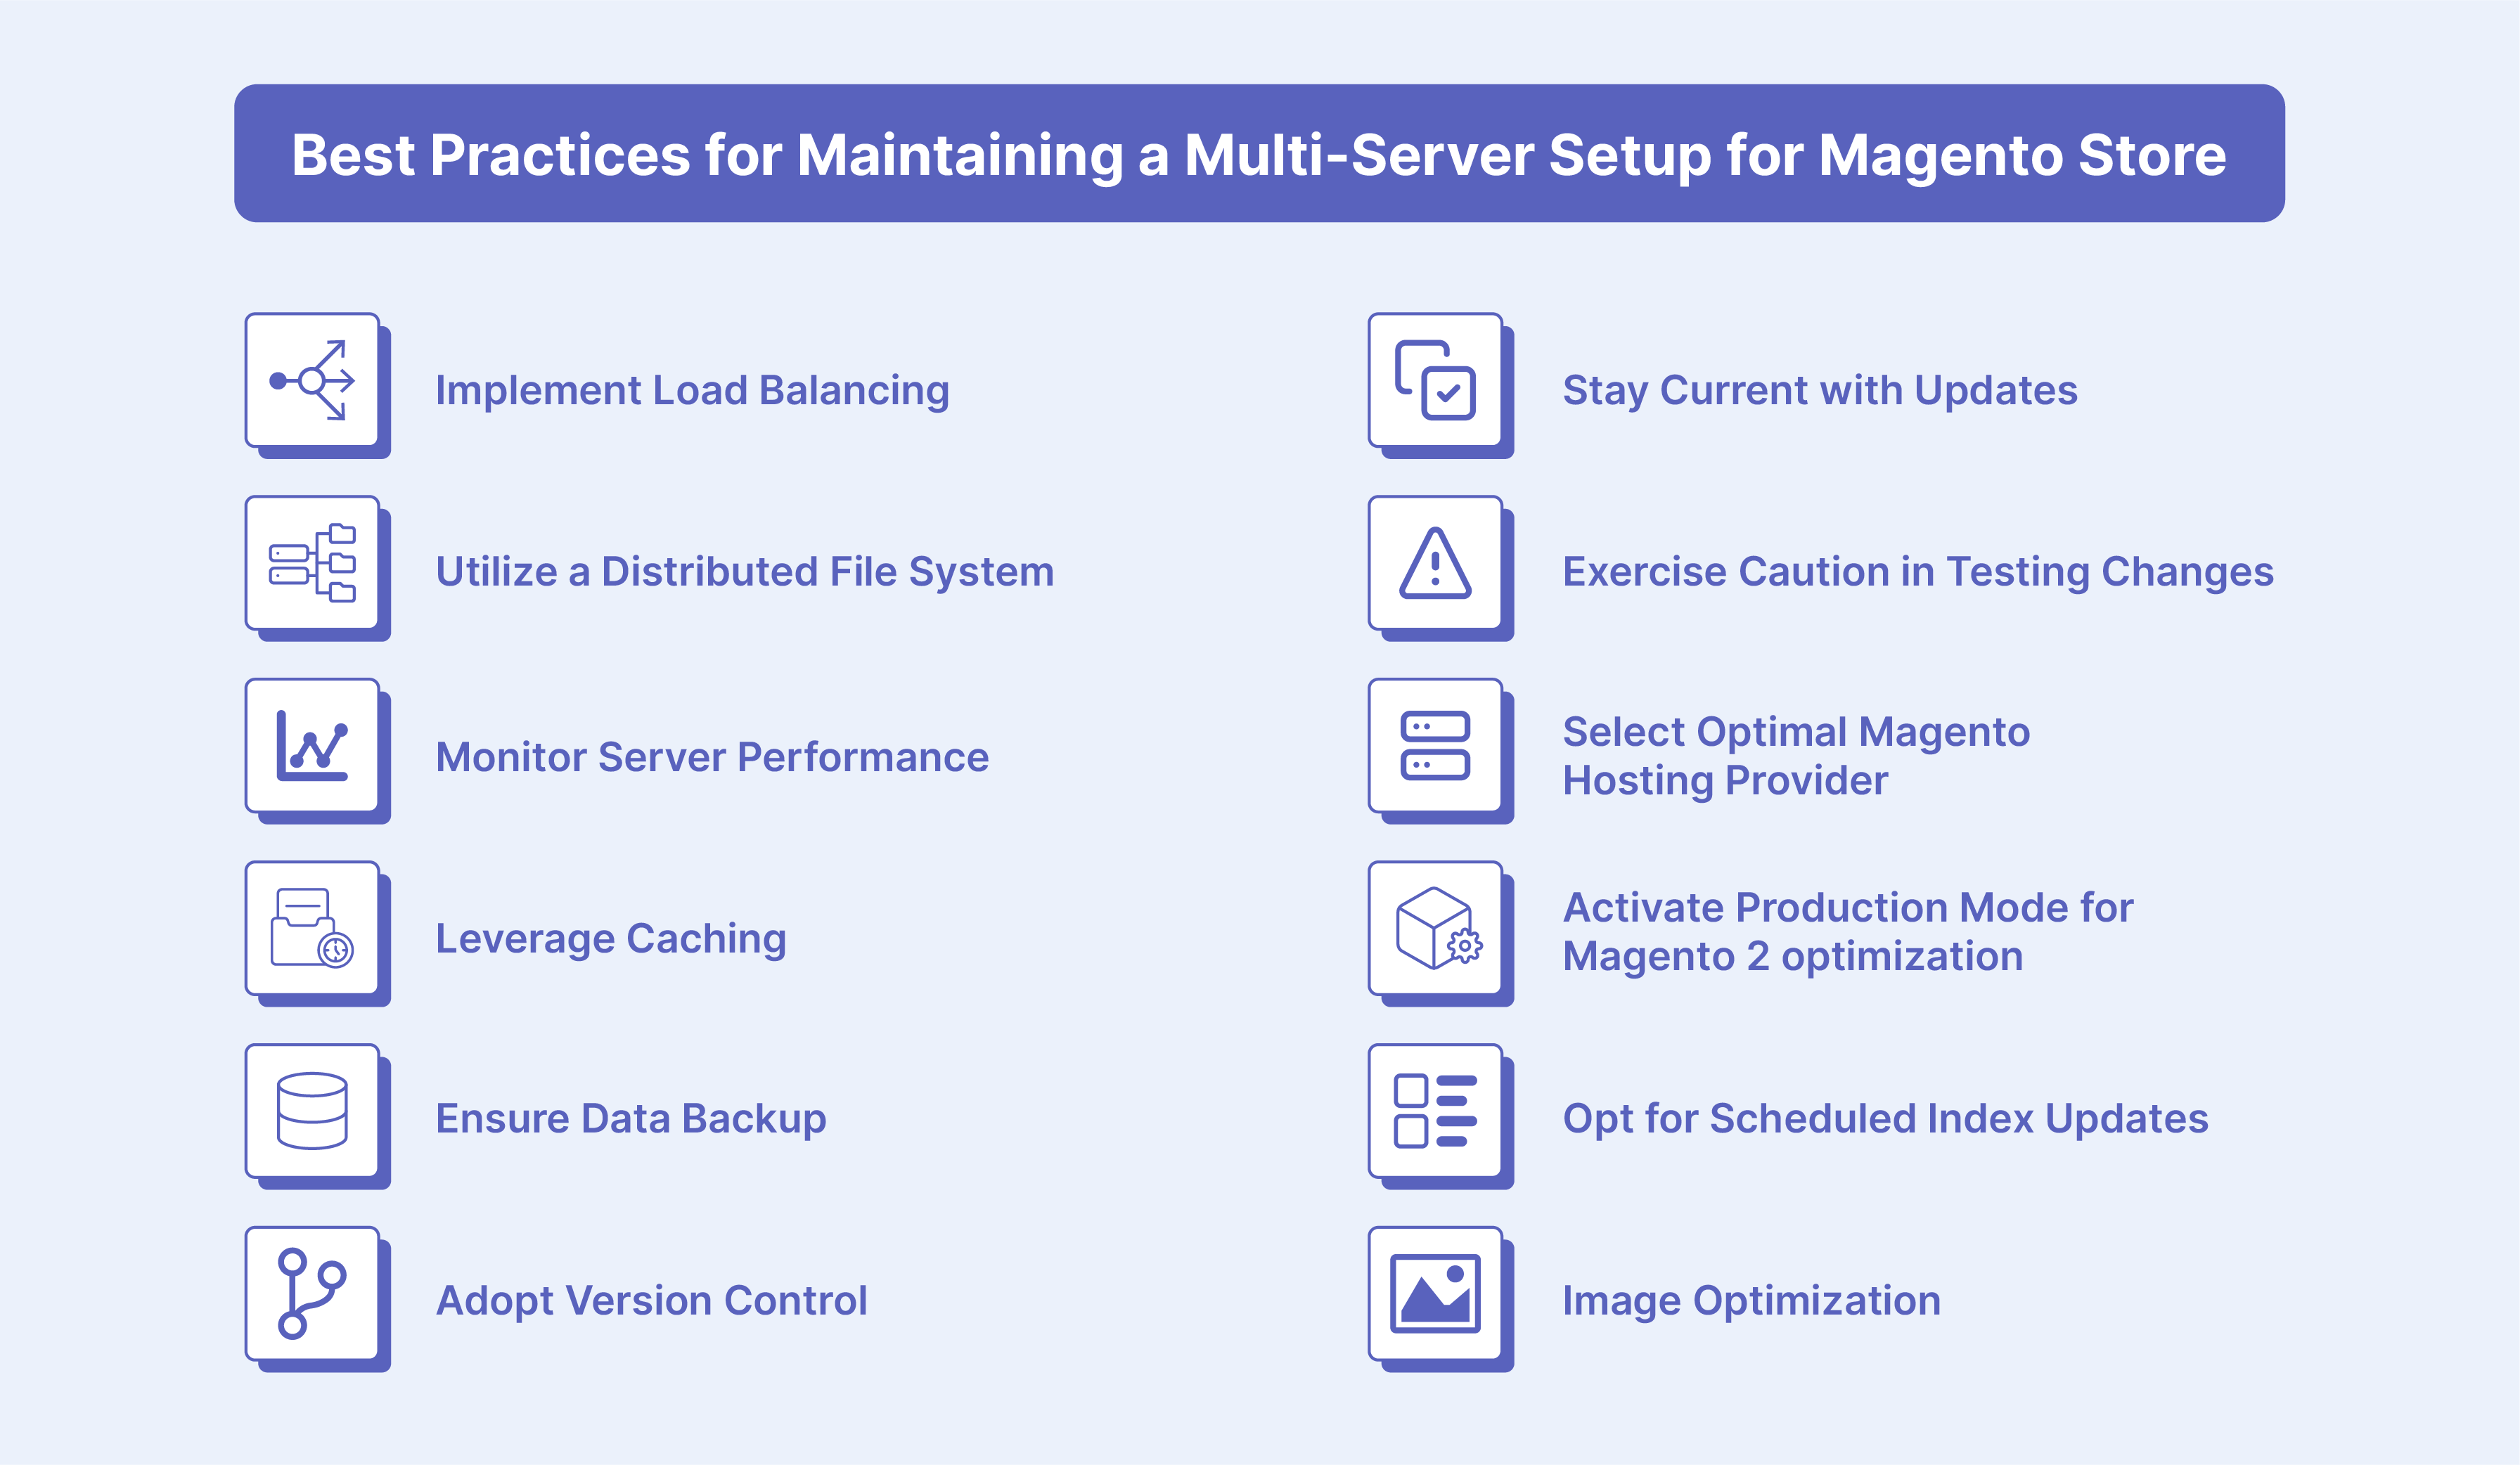 Best Practices for Maintaining Magento's Multi-Server Setup